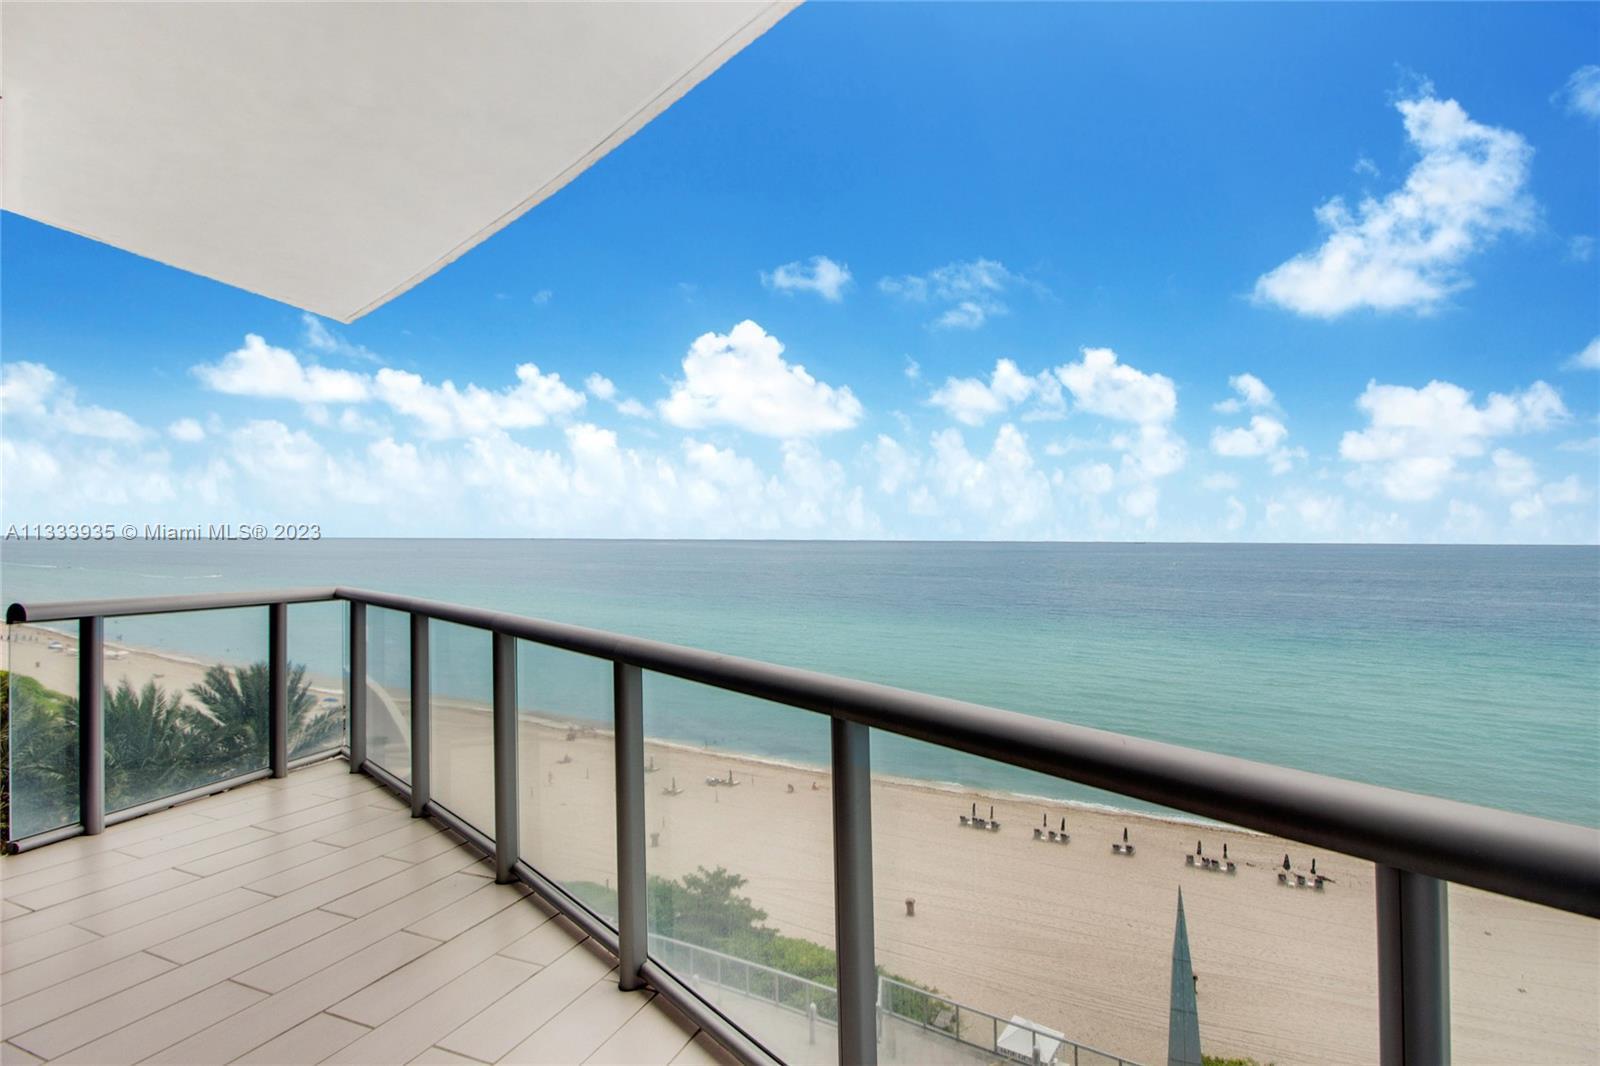 RESORT-LIKE MOMENTS AT JADE OCEAN. This flawless direct oceanview condo is located in the heart of S